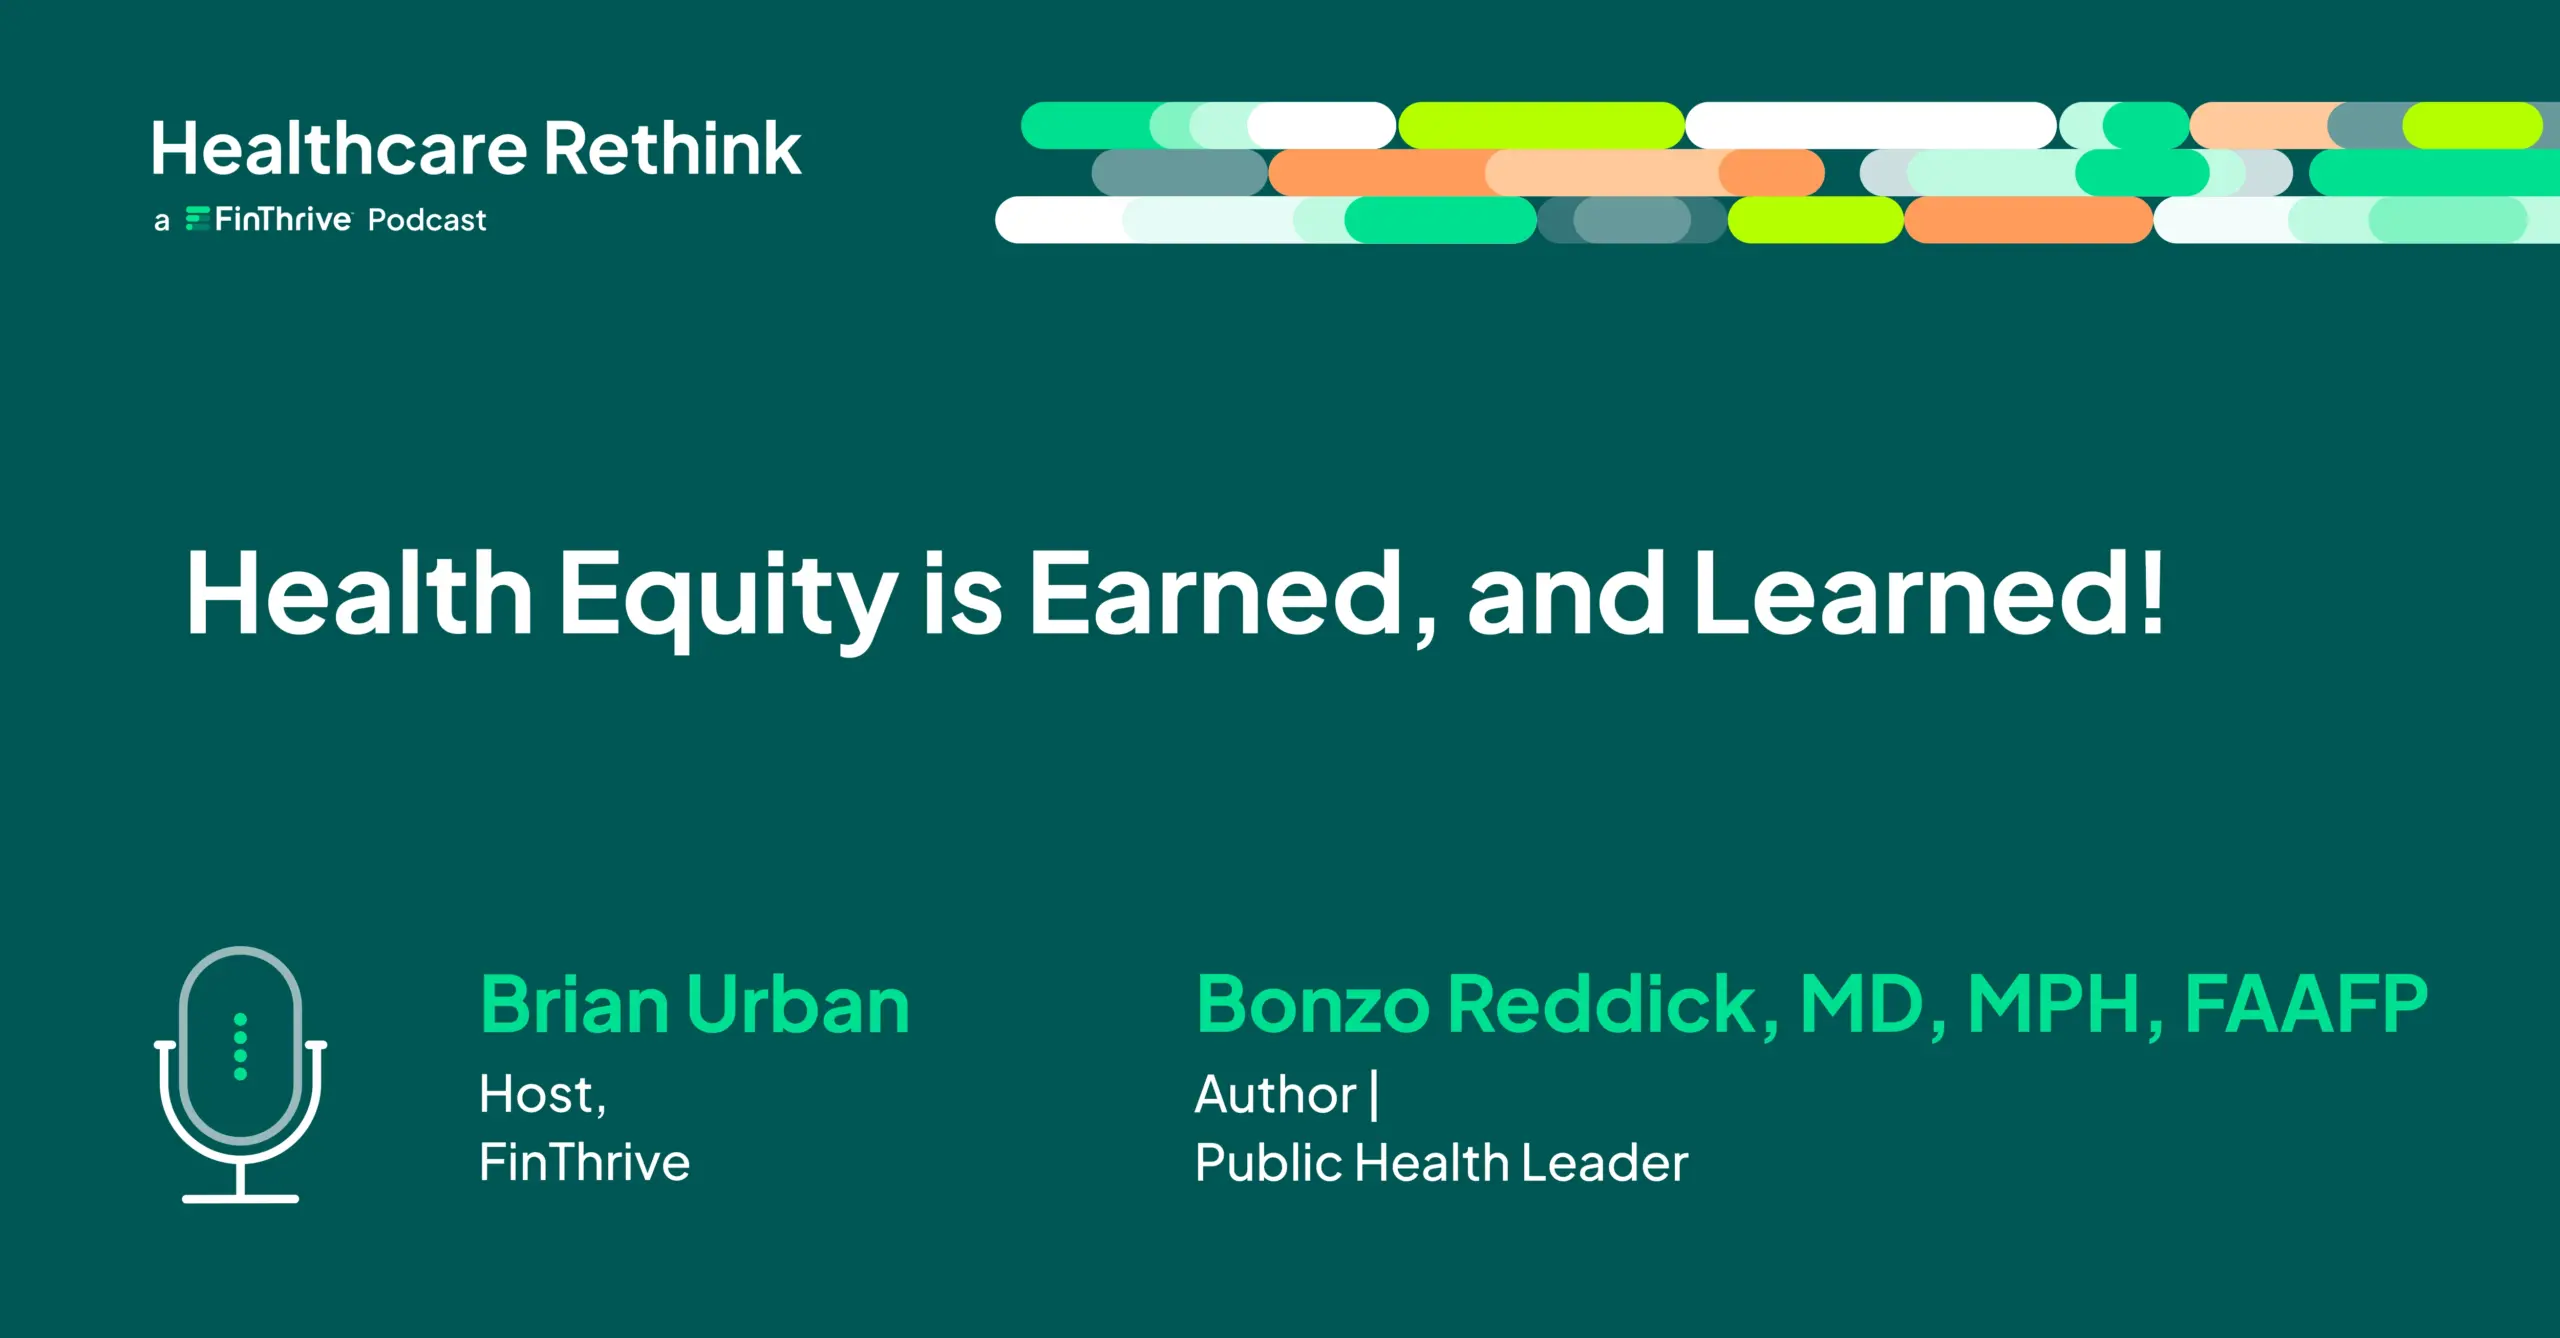 Health Equity is Earned and Learned!